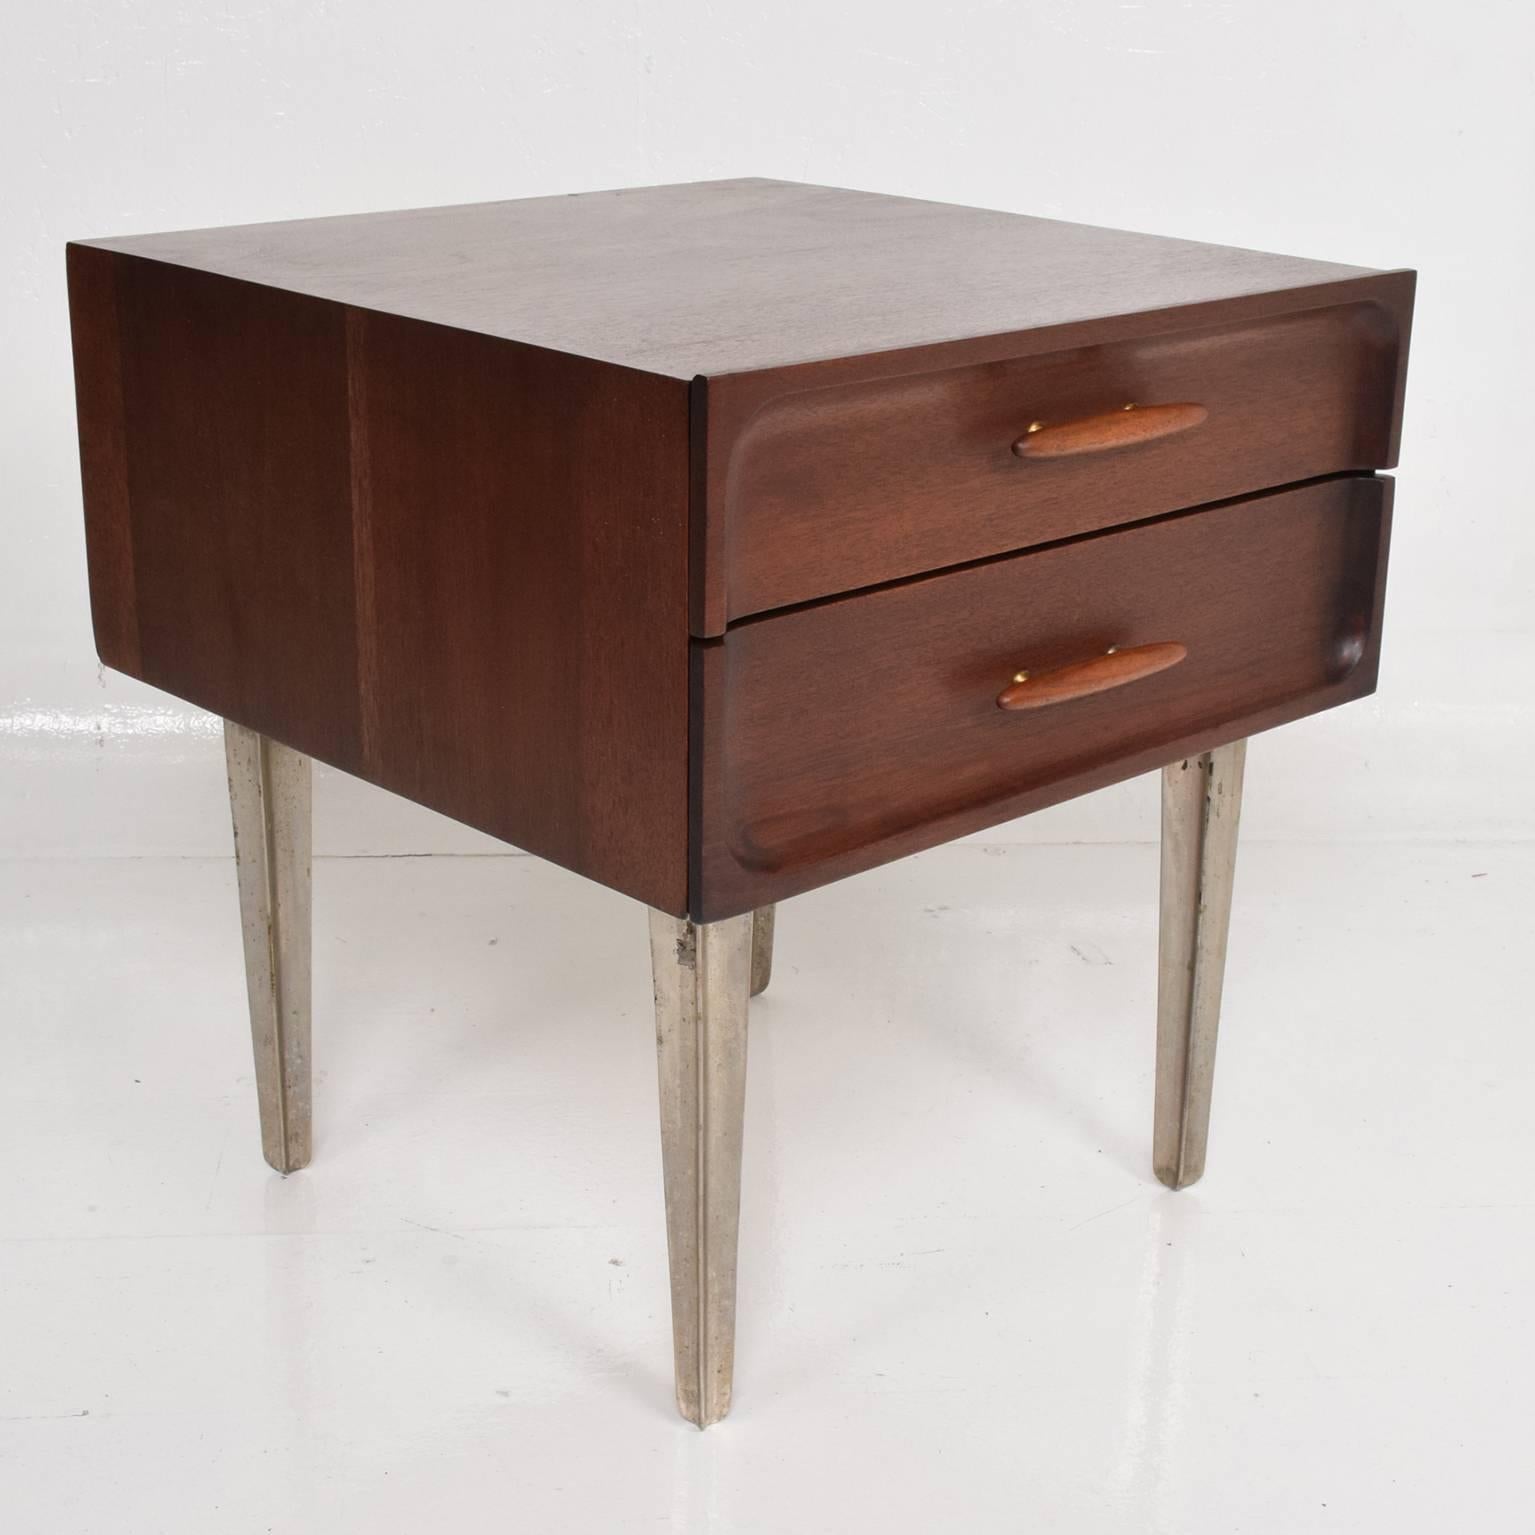 For your consideration an early and rare midcentury nightstand by Edmond J. Spence.
Mexico, 1950s.
Measure: 23.5'' in H x 22